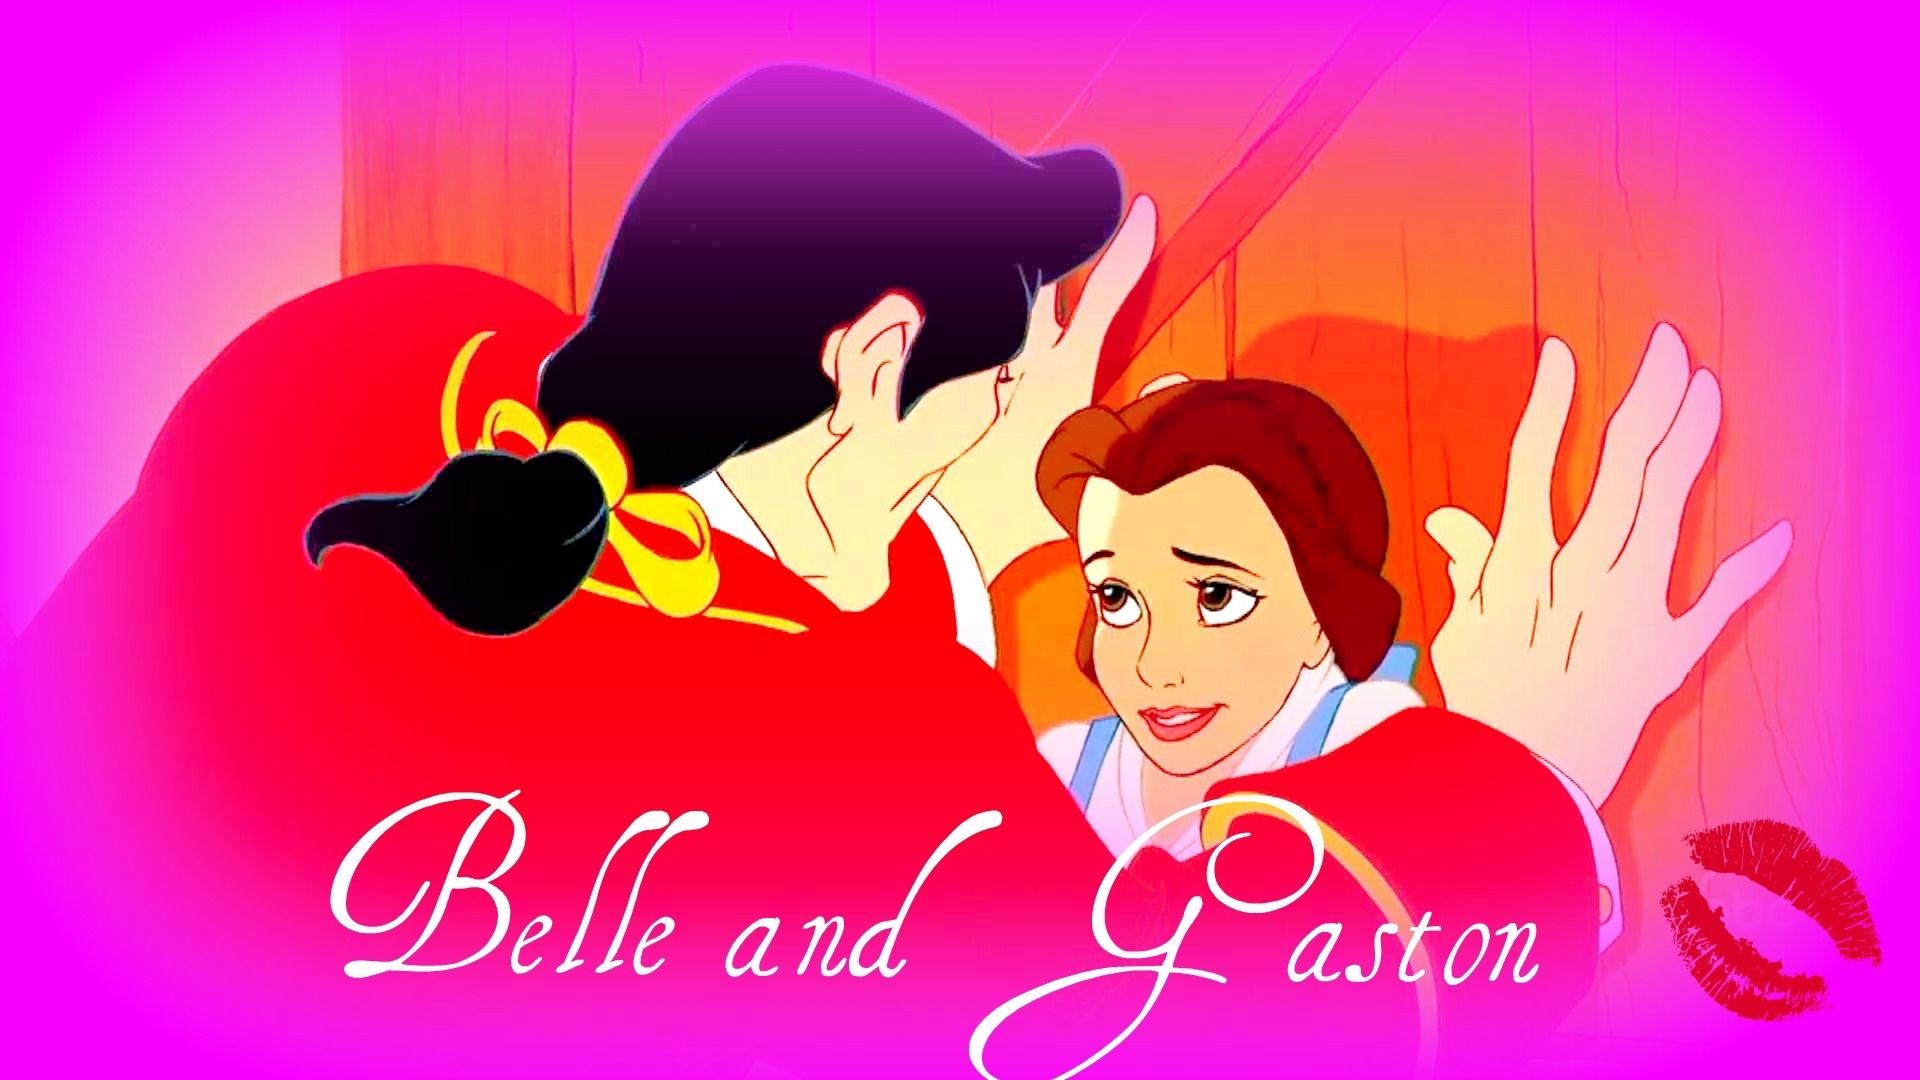 Belle and Gaston Beauty and the Beast Cartoon Widescreen Wallpaper